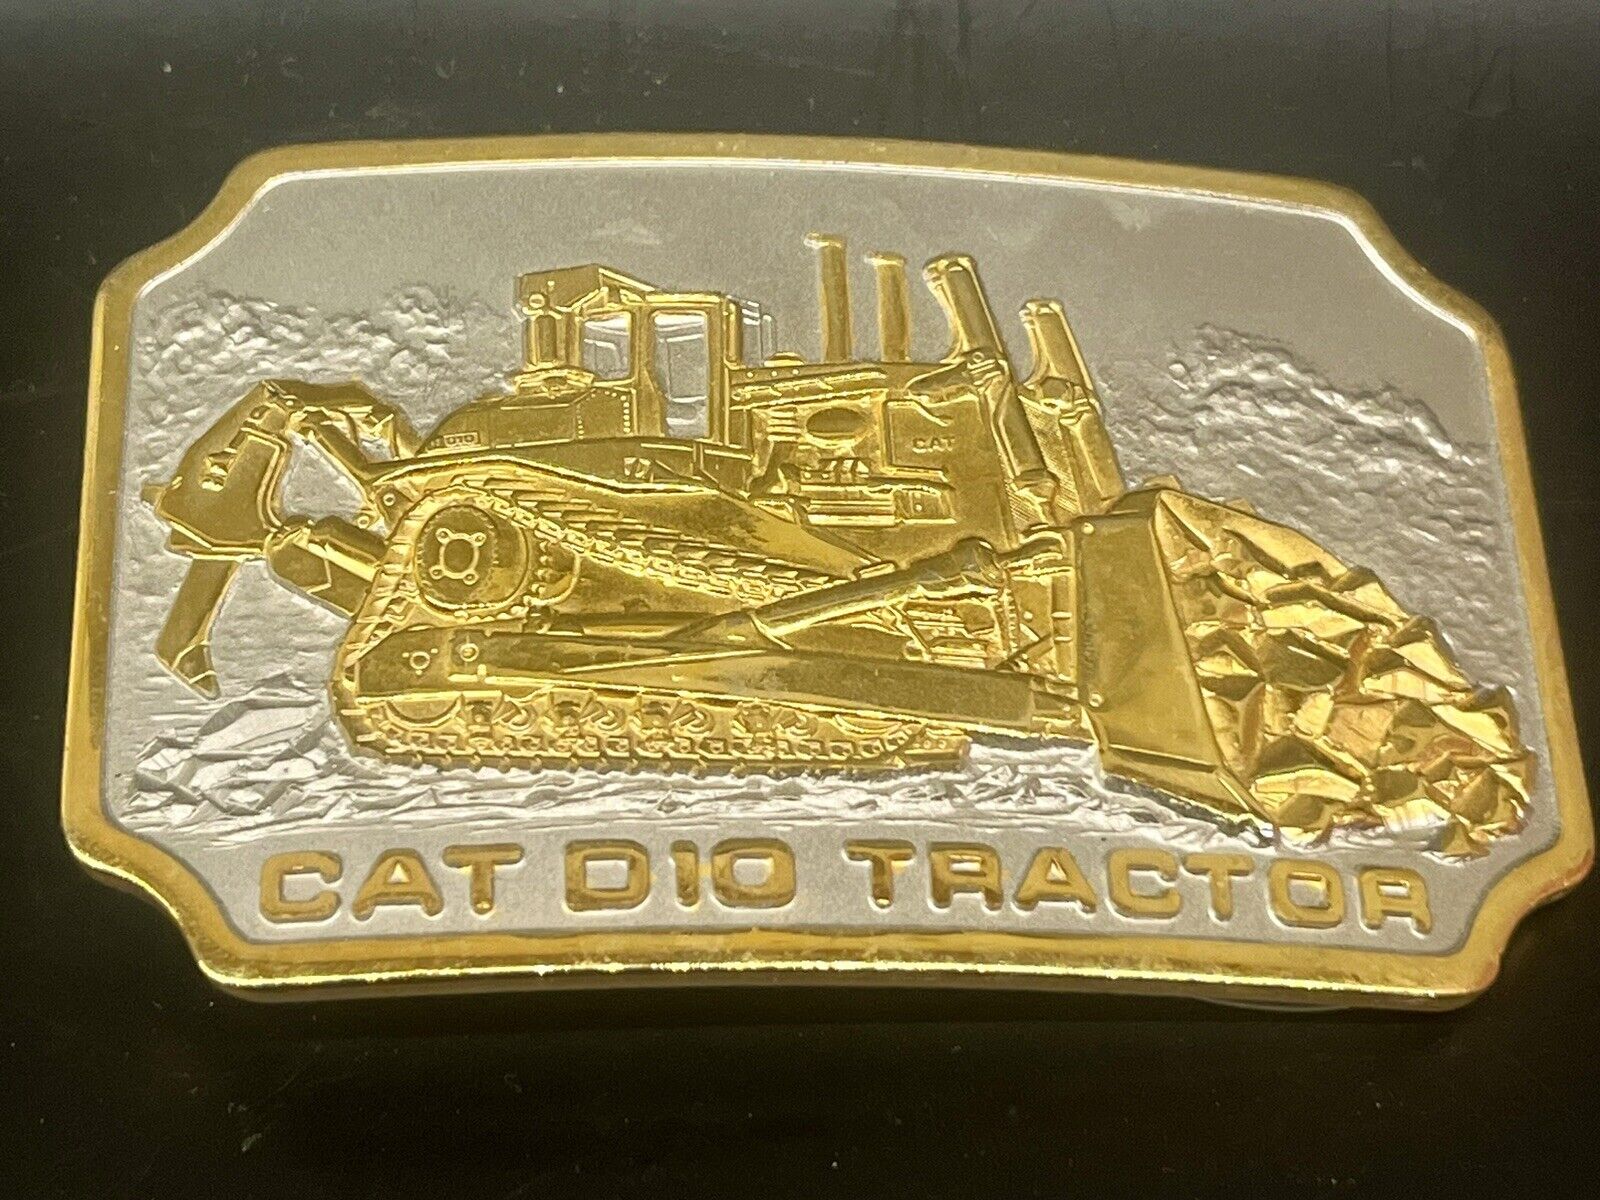 Caterpillar Belt Buckle 1982/D 10 Tractor gold and silver rare